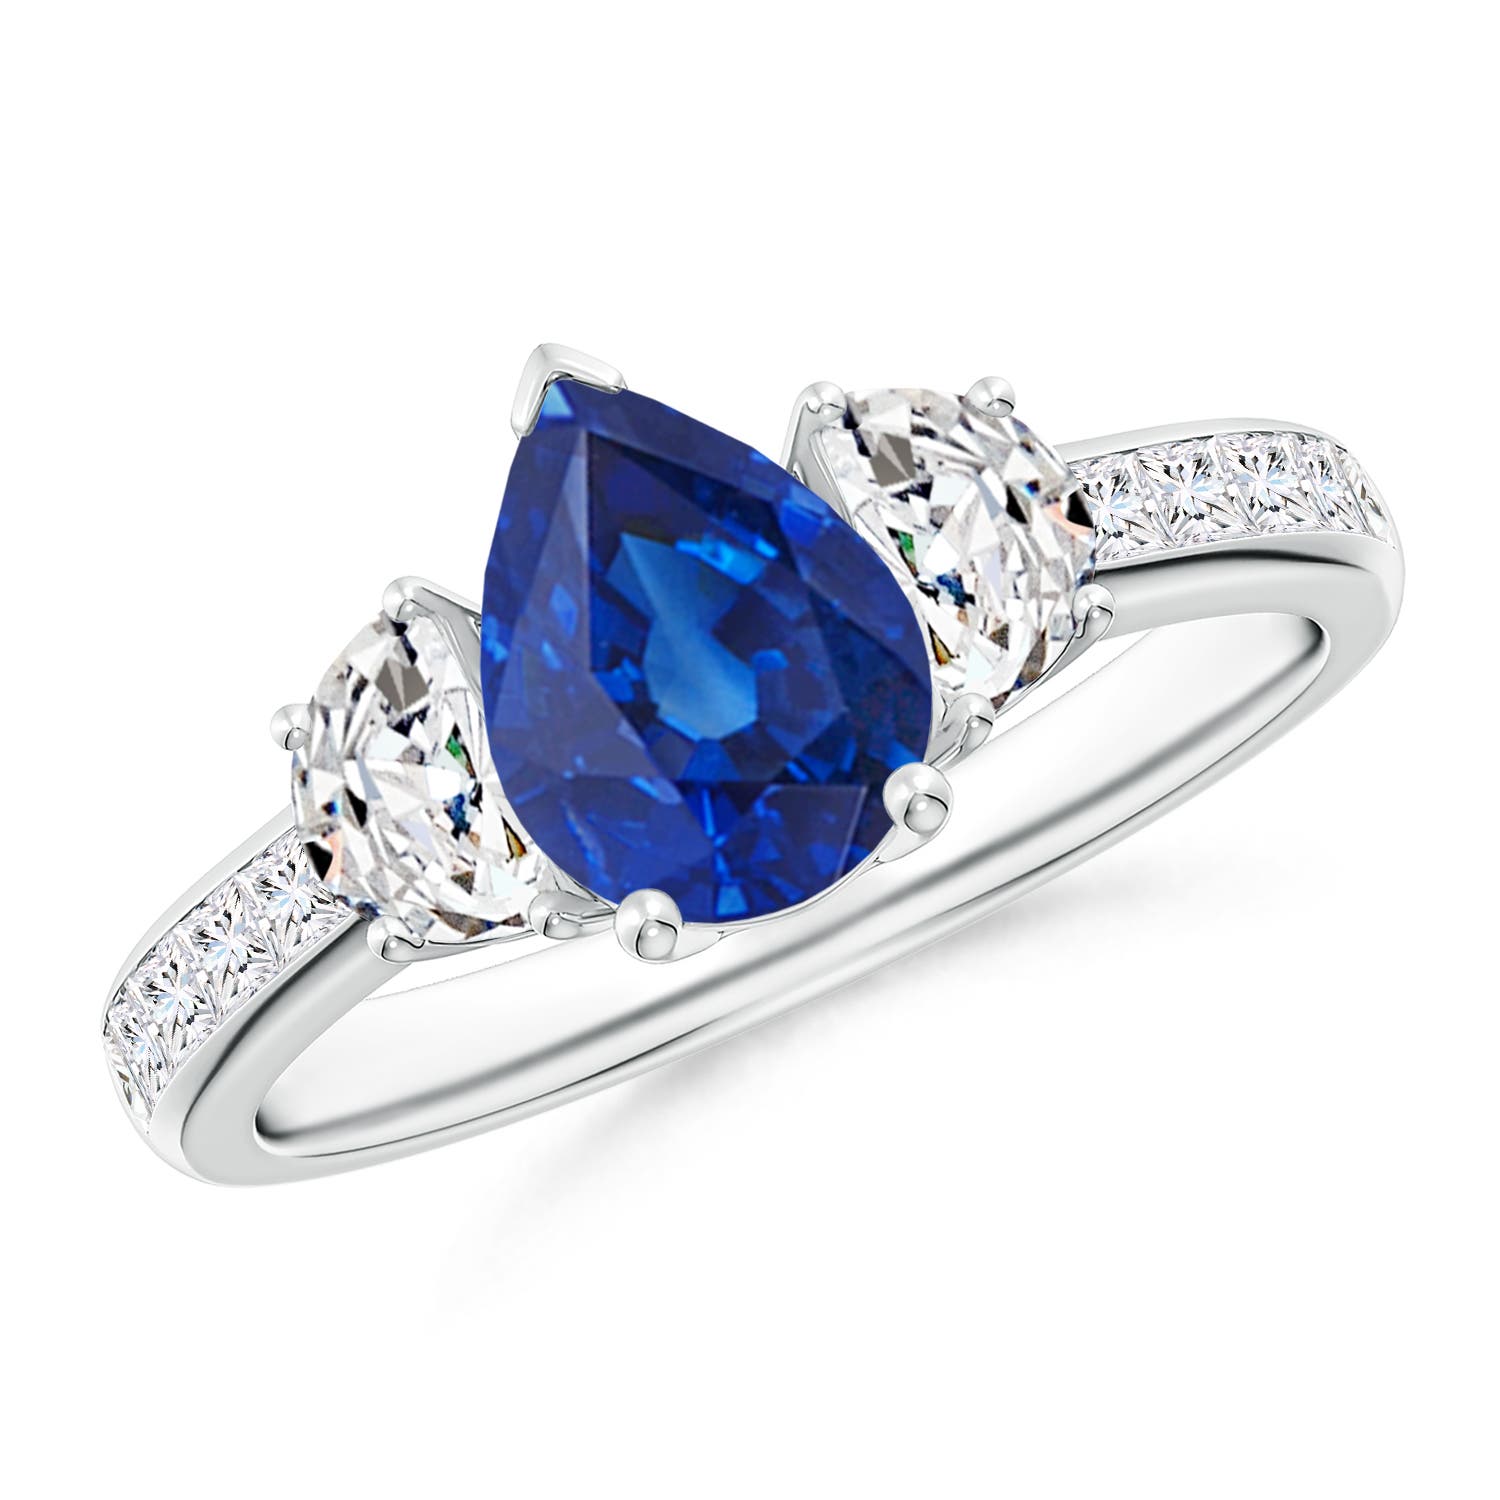 AAA - Blue Sapphire / 2.01 CT / 14 KT White Gold